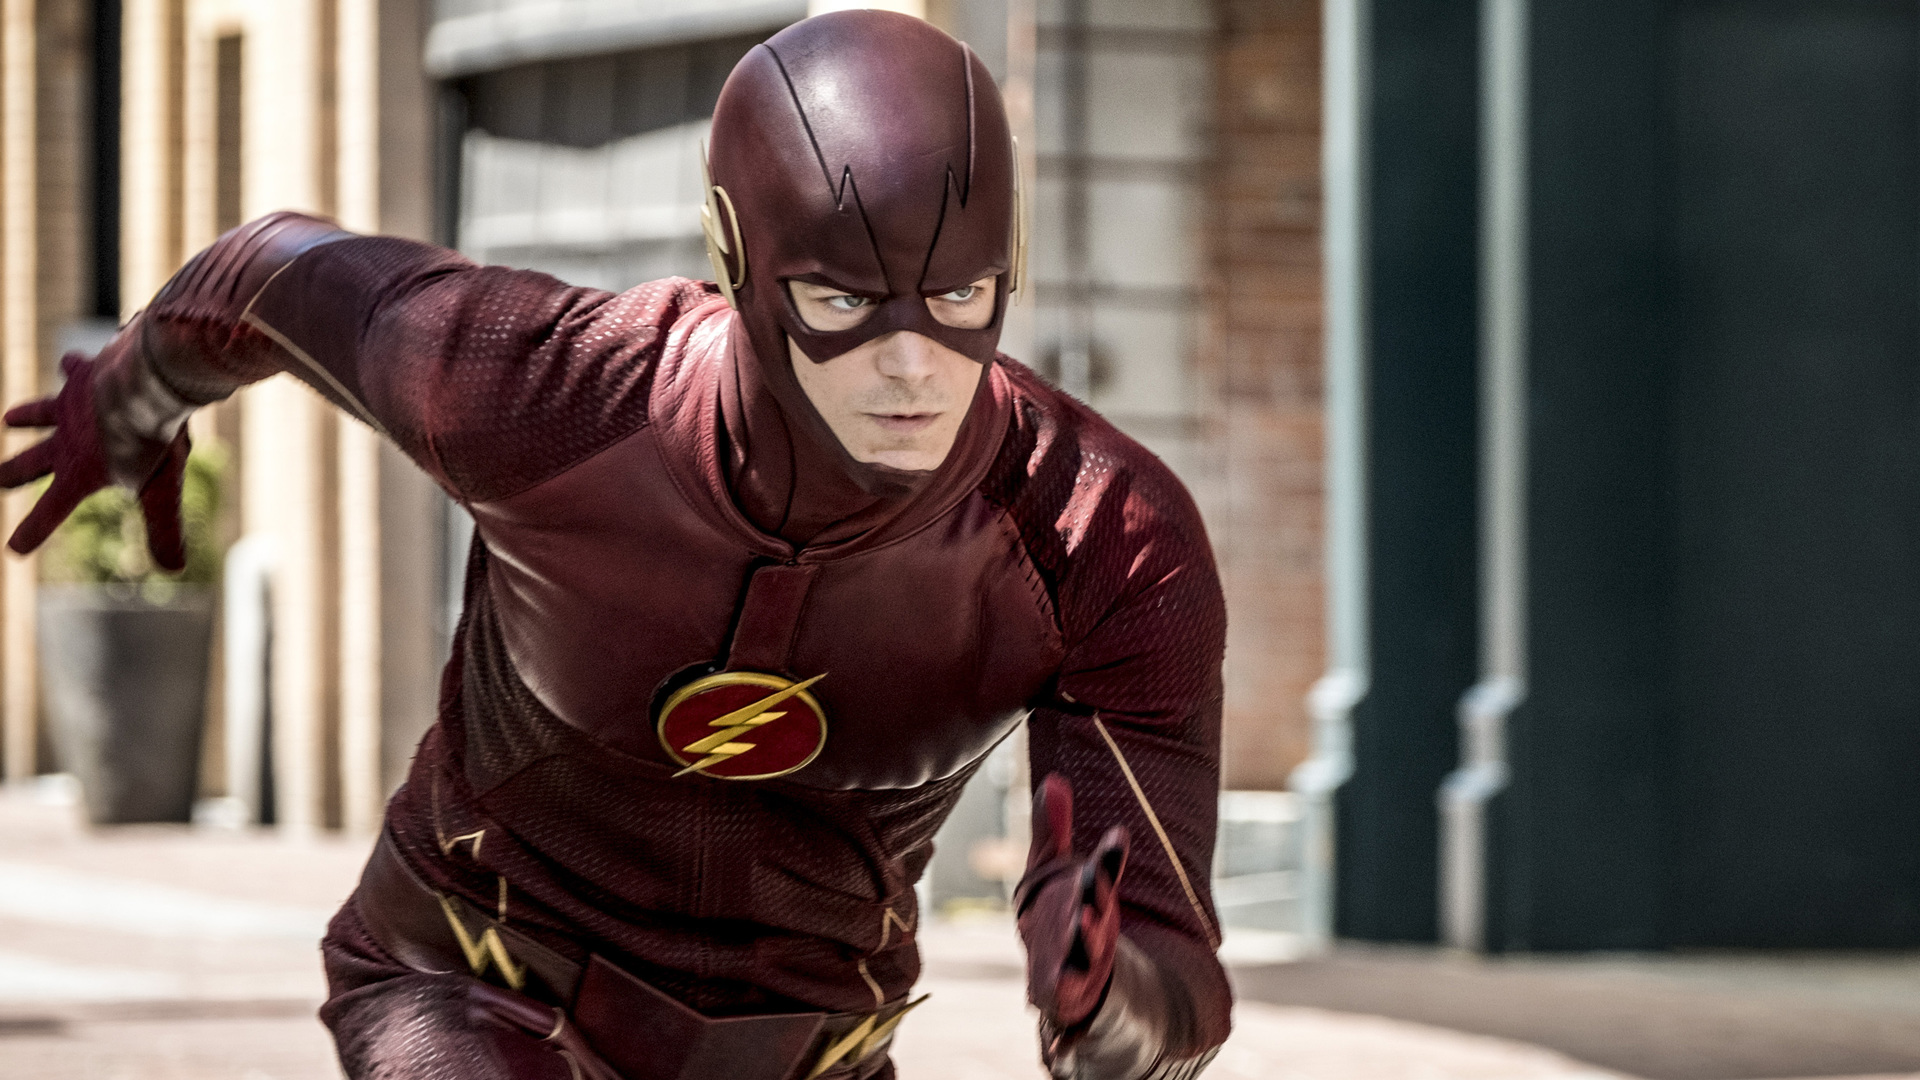 Where is The Flash Filmed? Is Central City a Real Filming Location?